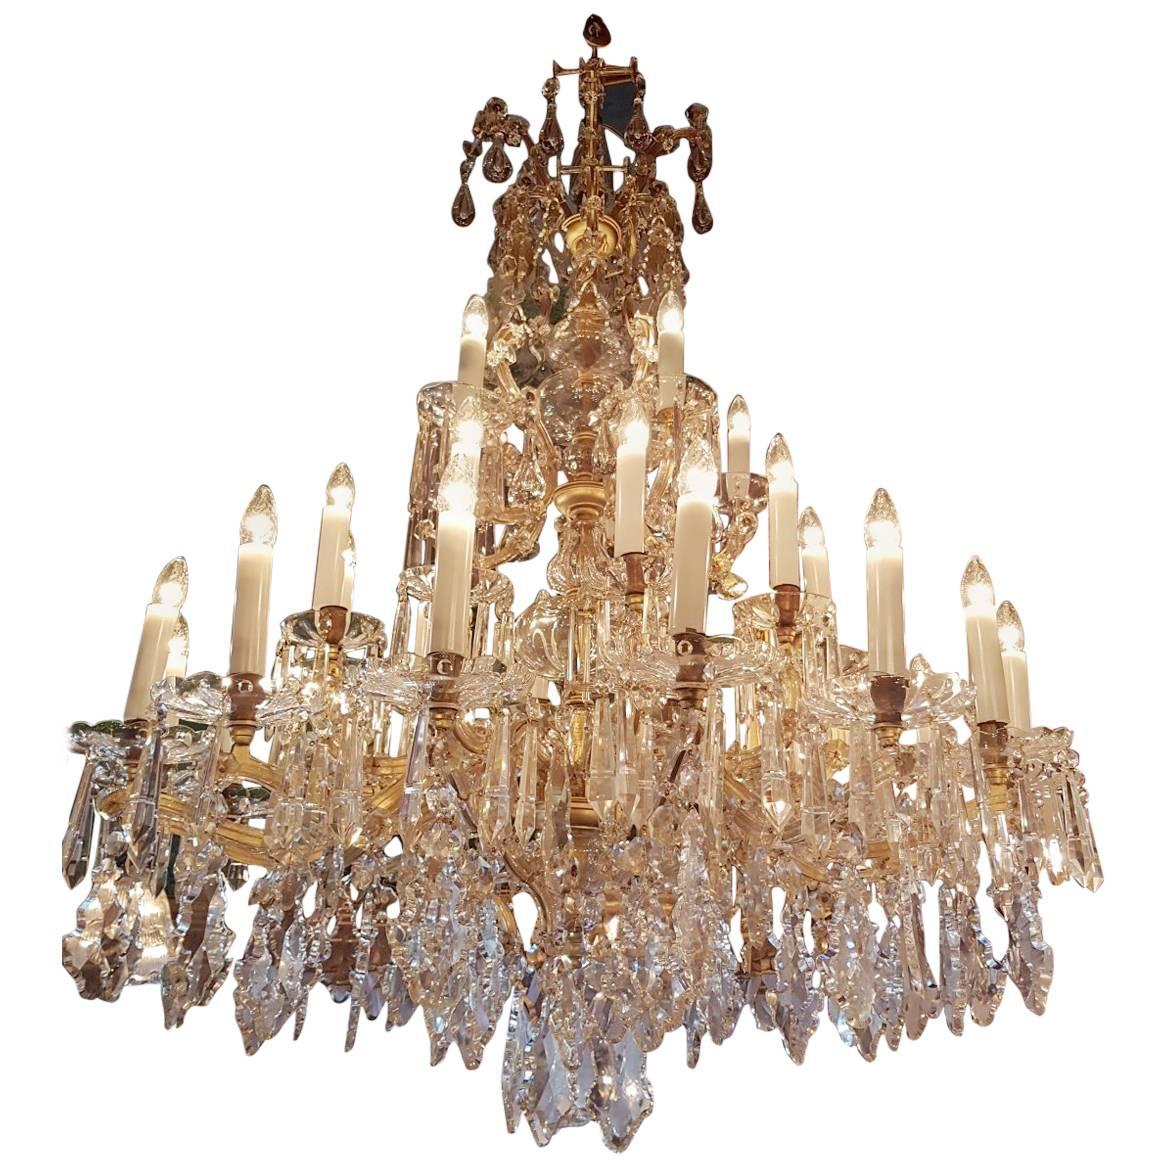 Large French Maria Theresia Chandelier with 30 Lights, Cage Model 20th Century For Sale